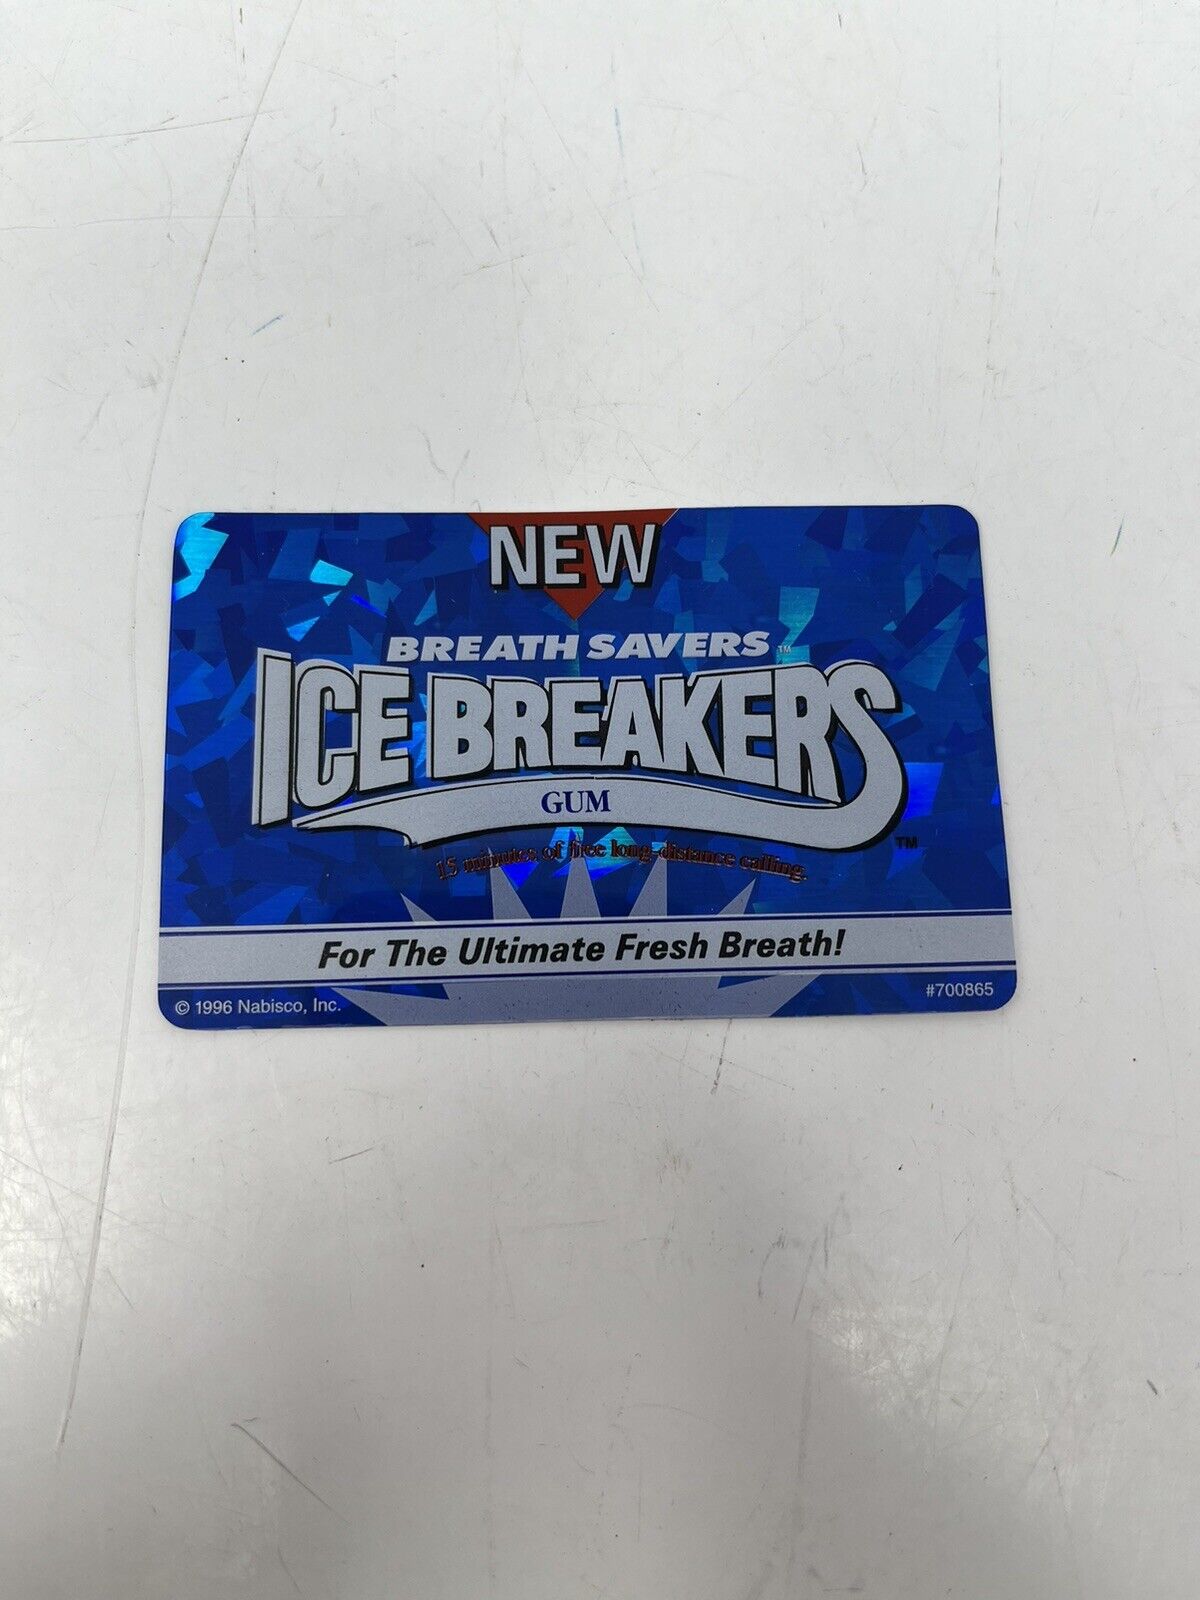 15m Breath Savers Ice Breakers Gum \'For The Ultimate Fresh Breath\' Phone Card